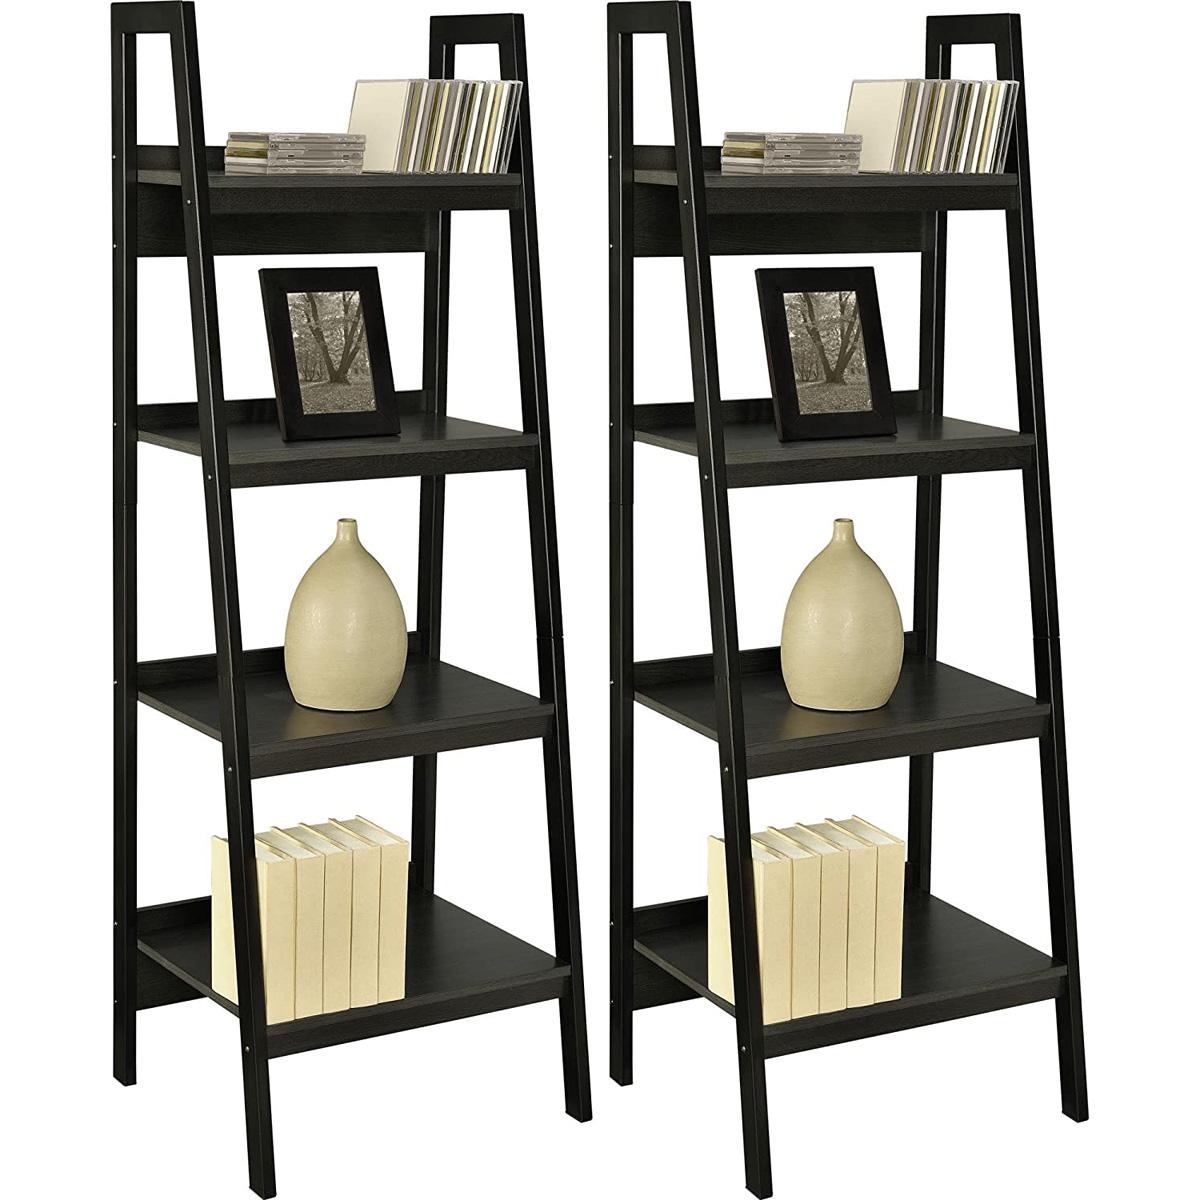 Ameriwood Home Lawrence Ladder Bookcase Bundle for $61.50 Shipped